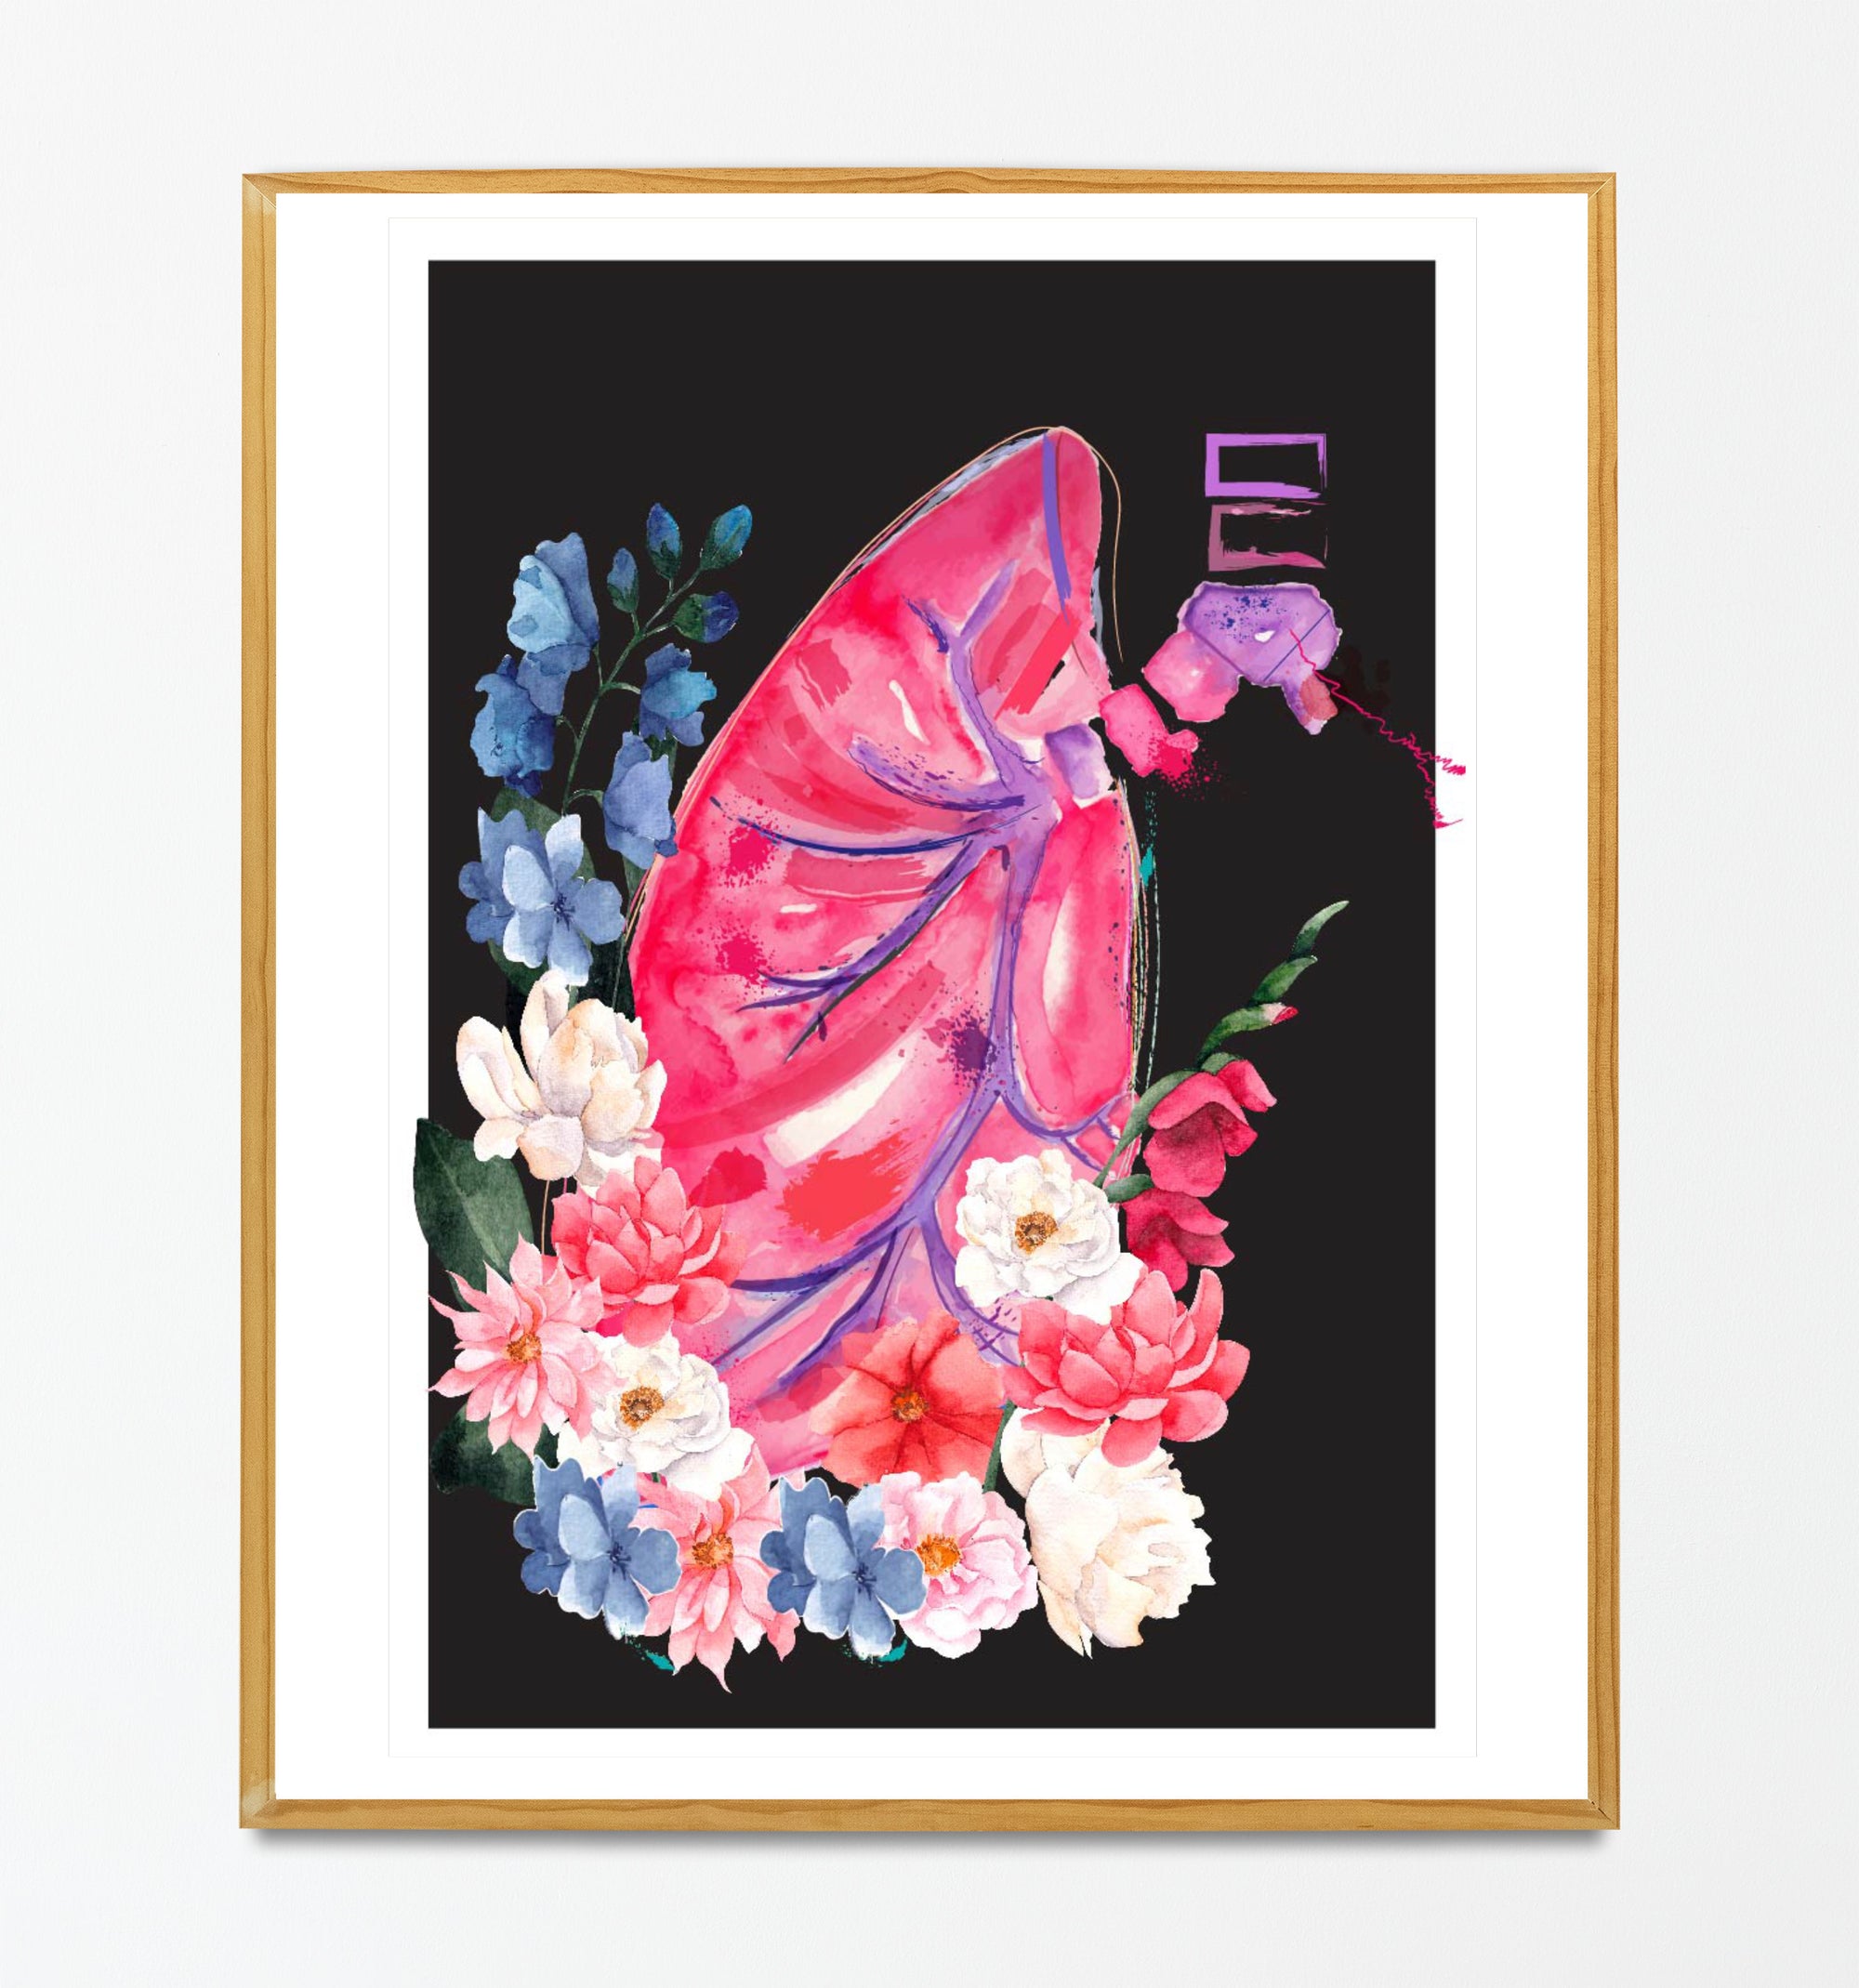 lung anatomy art with flowers